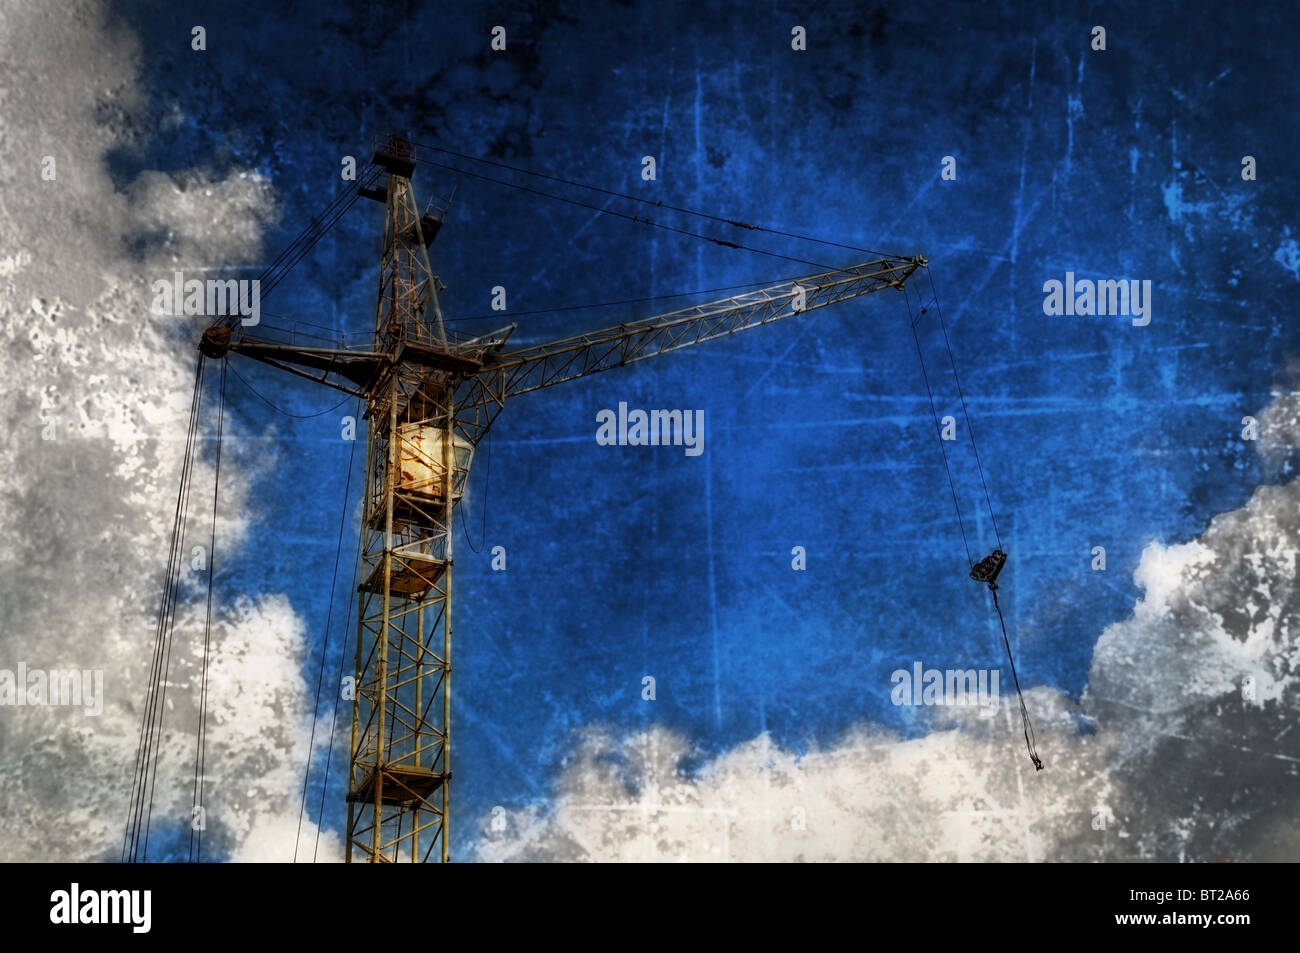 Old rusty rail crane standing upon blue sky with heavy grunge effect Stock Photo